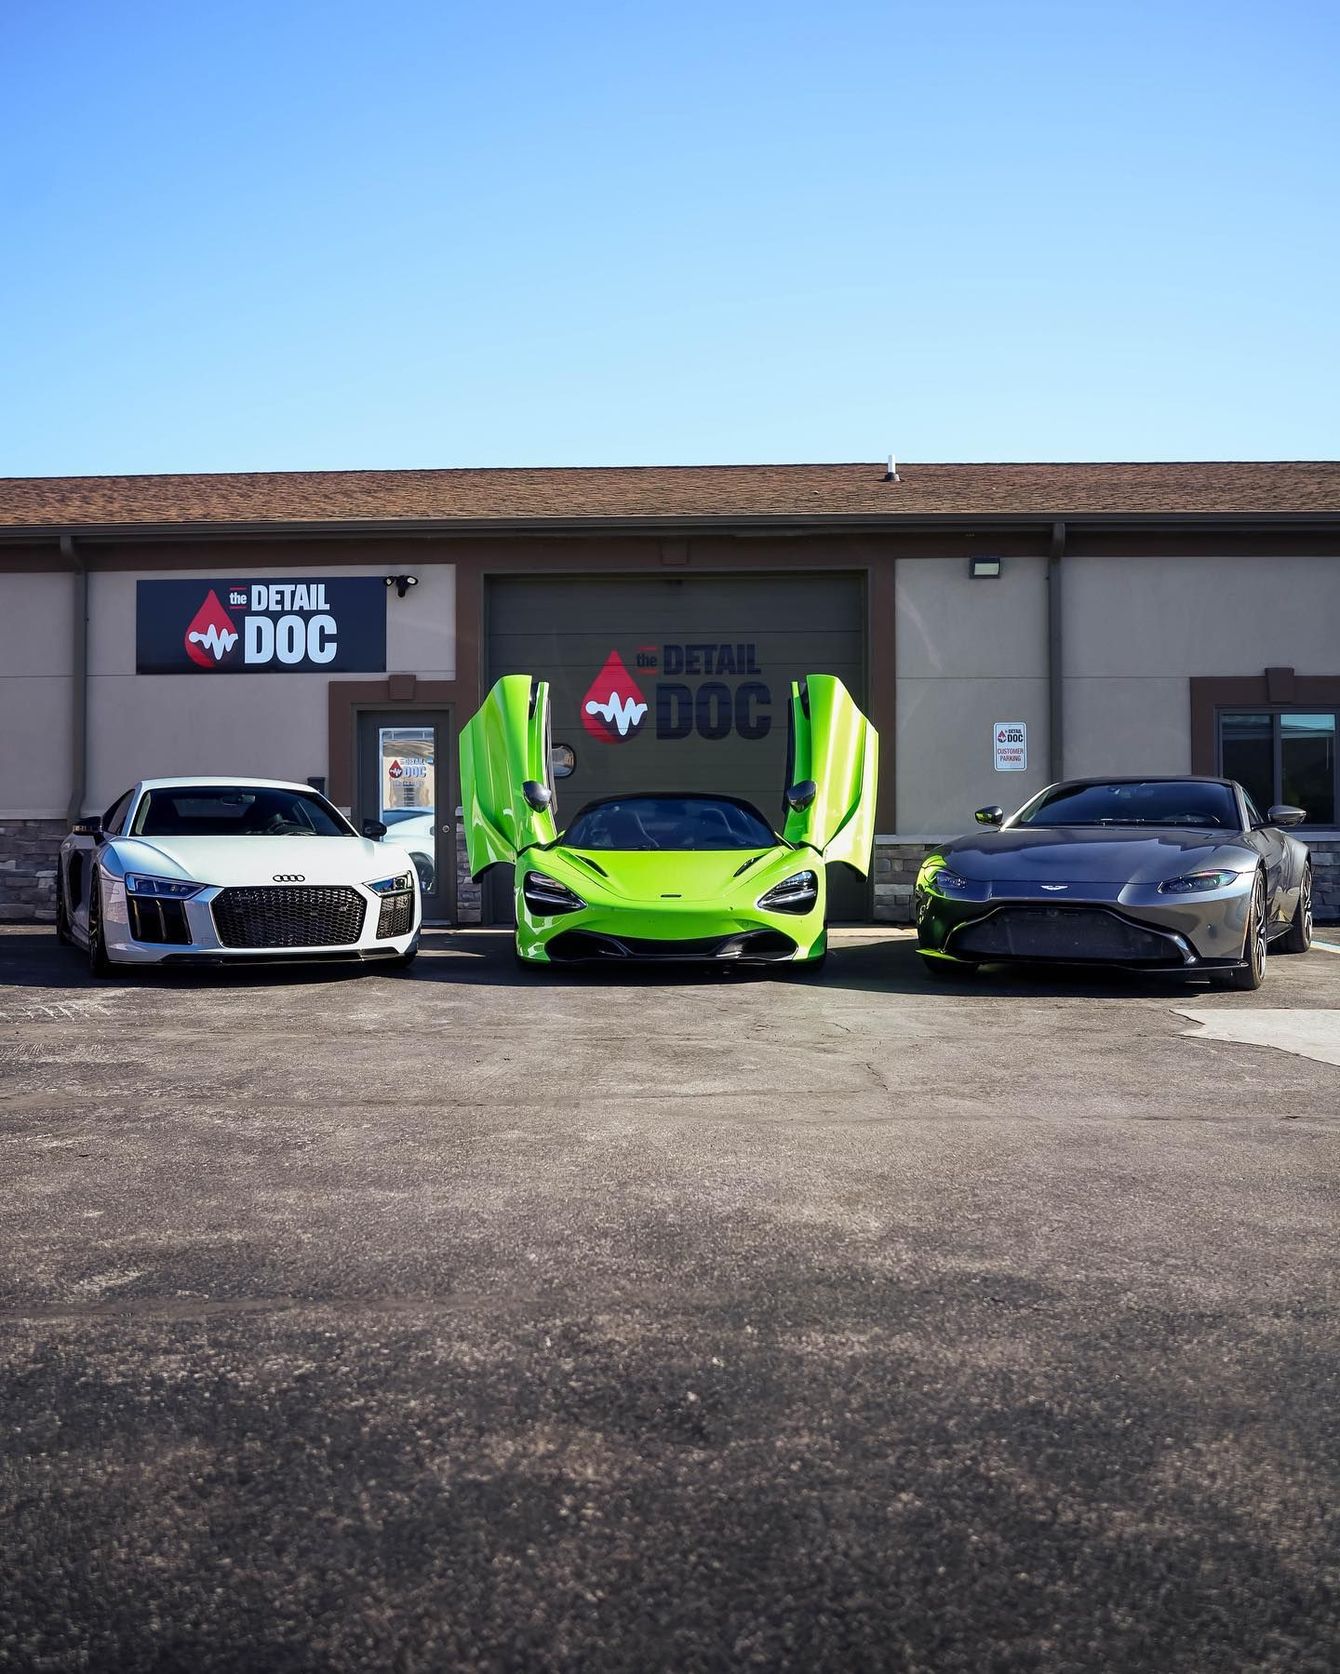 three sports cars are parked in front of a building that says detail dog